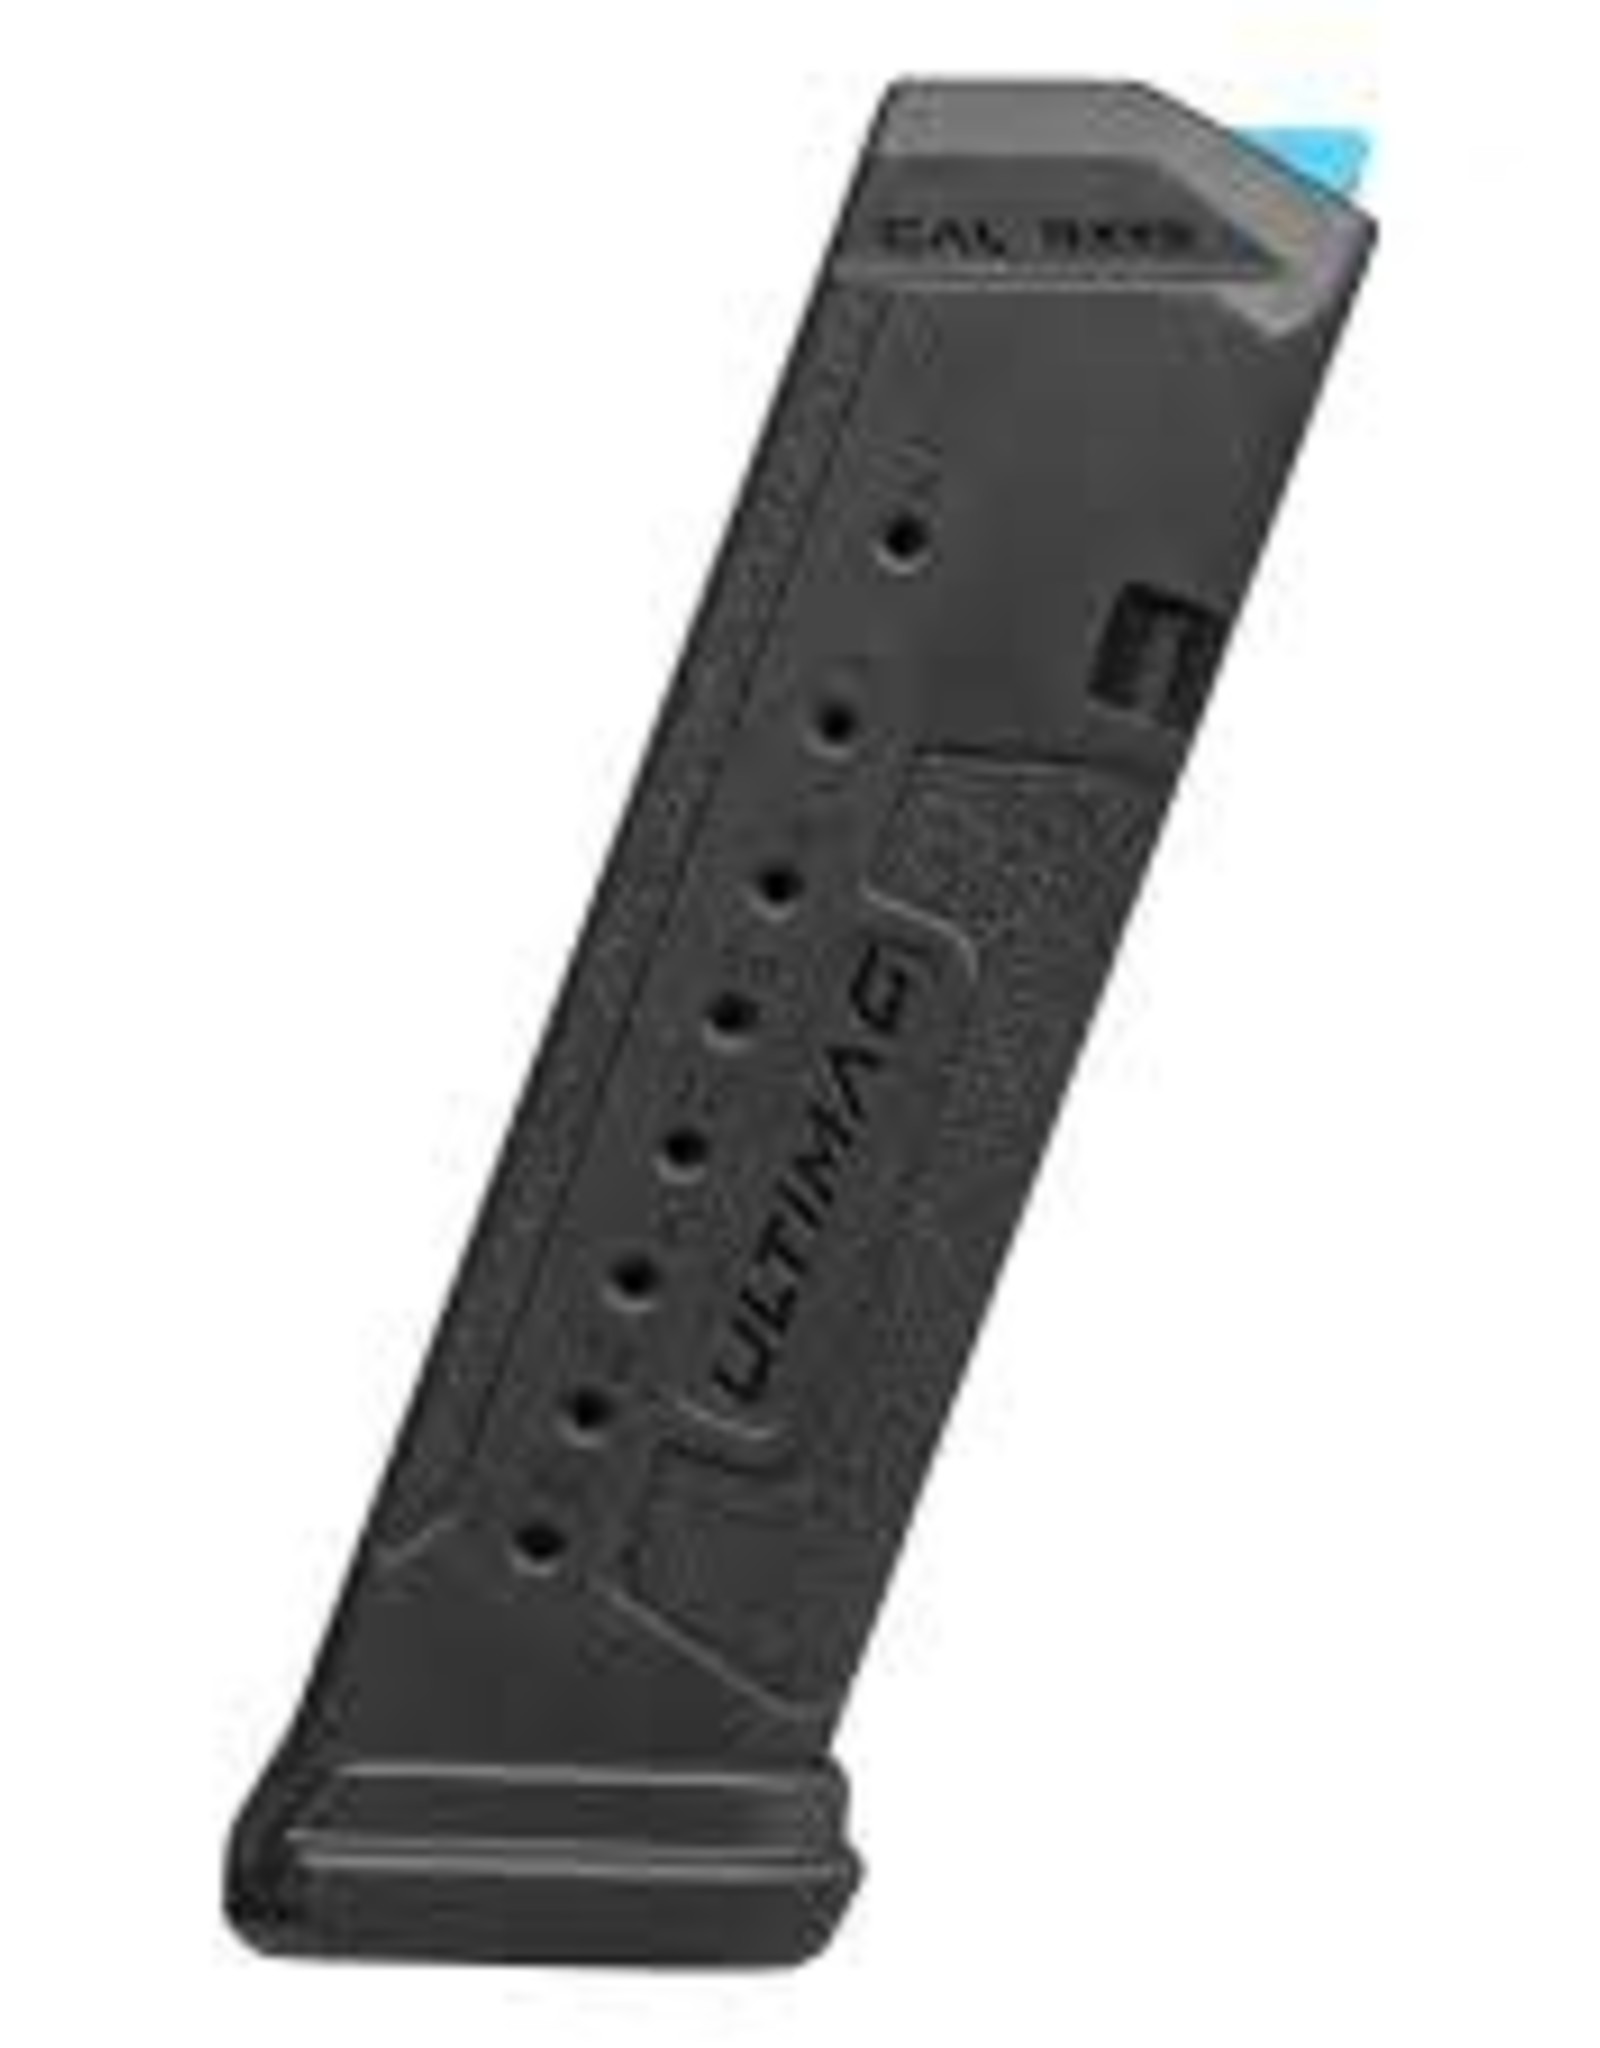 F.A.B. Defense Glock G17 Compatible 10 Roiund 2 Floor Plates Included